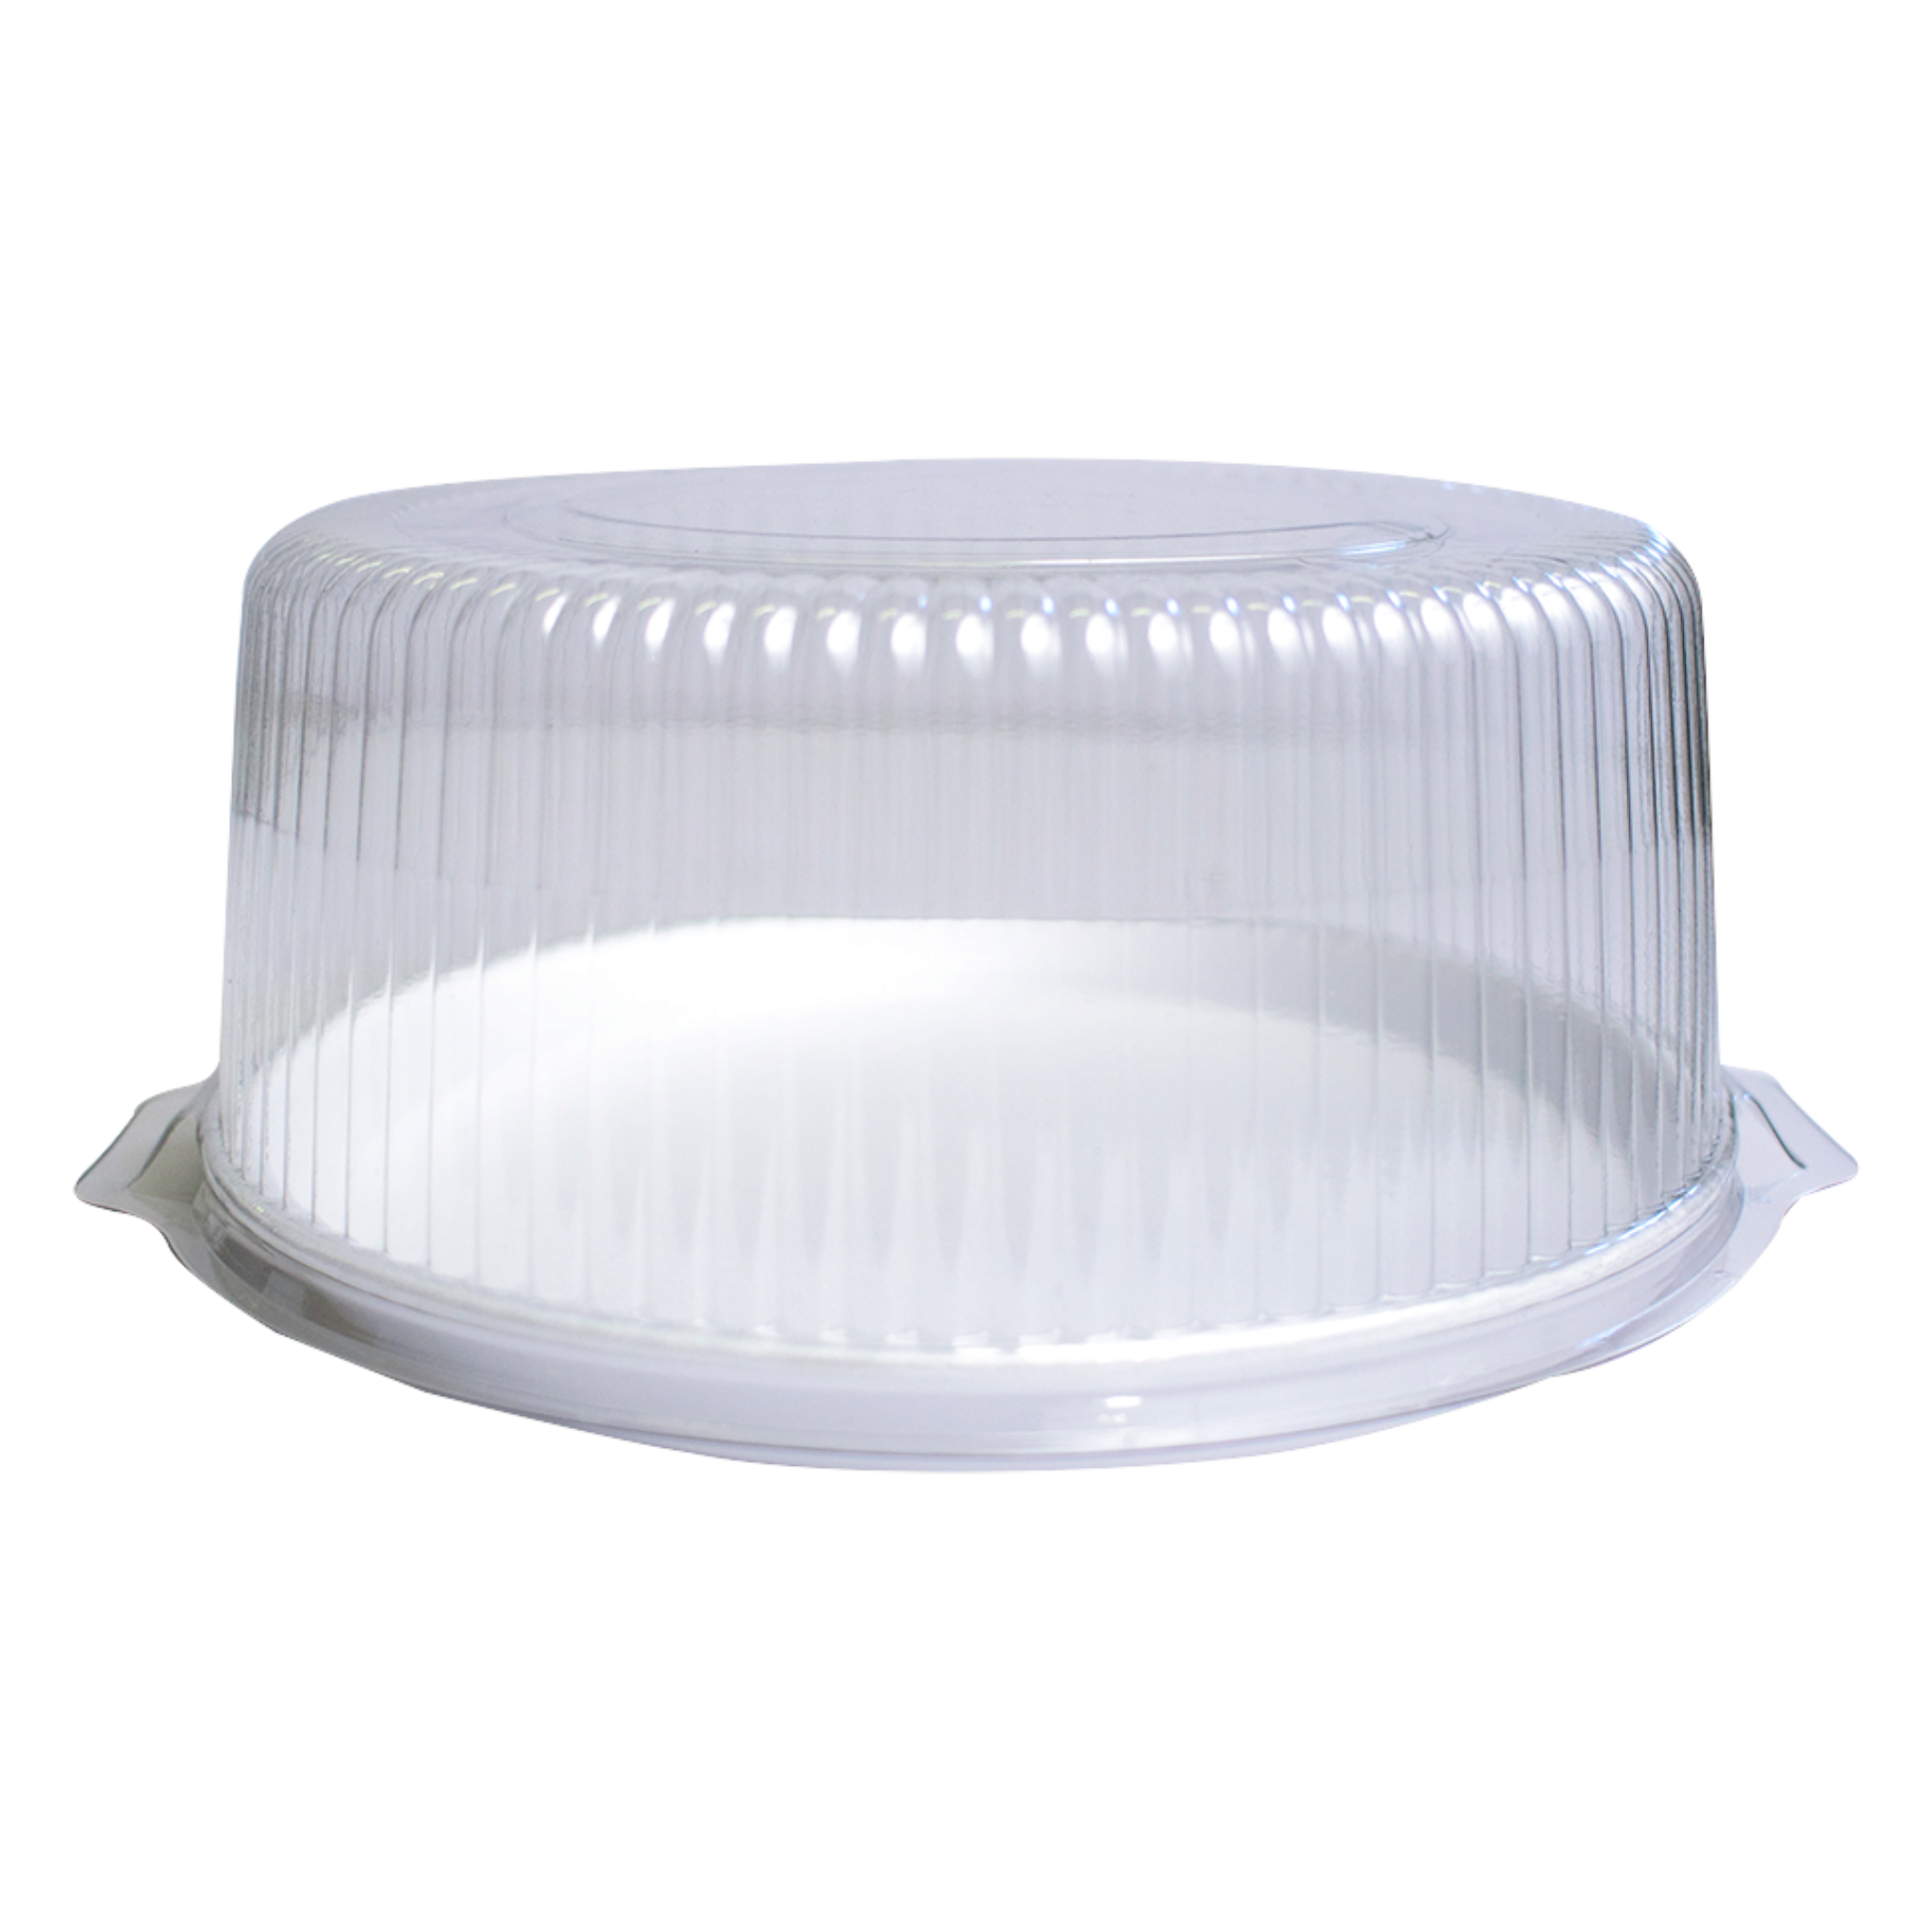 TableCraft H820P422 Clear Styrene Cake Plate and Cover Set 12-3/4